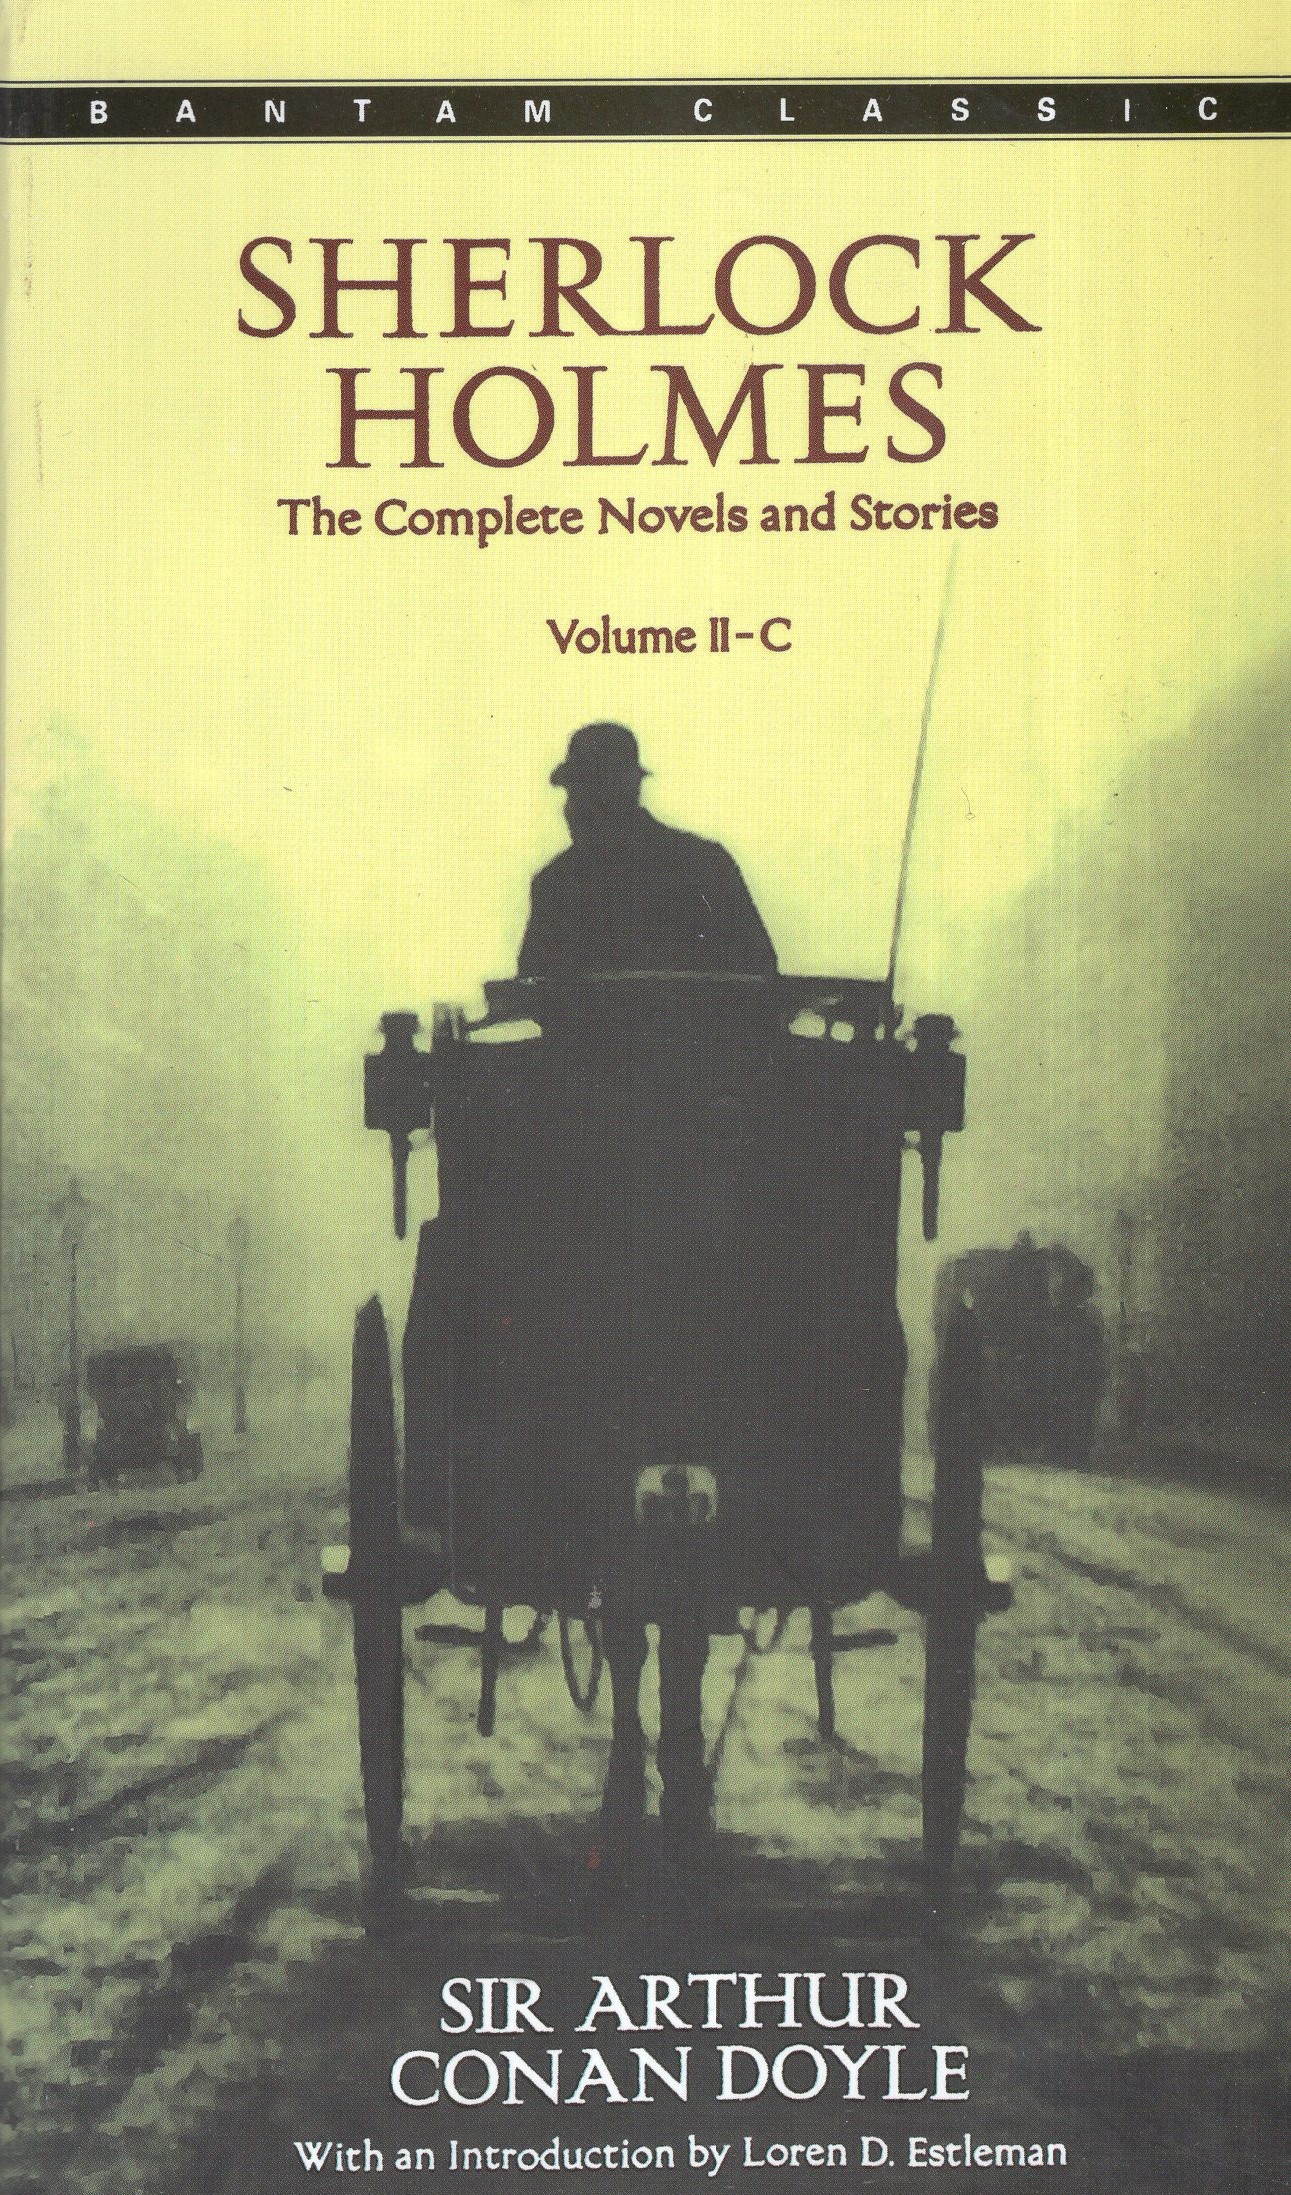  Sherlock Holmes C The Complete Novels and Stories(‌Bantam Classic)